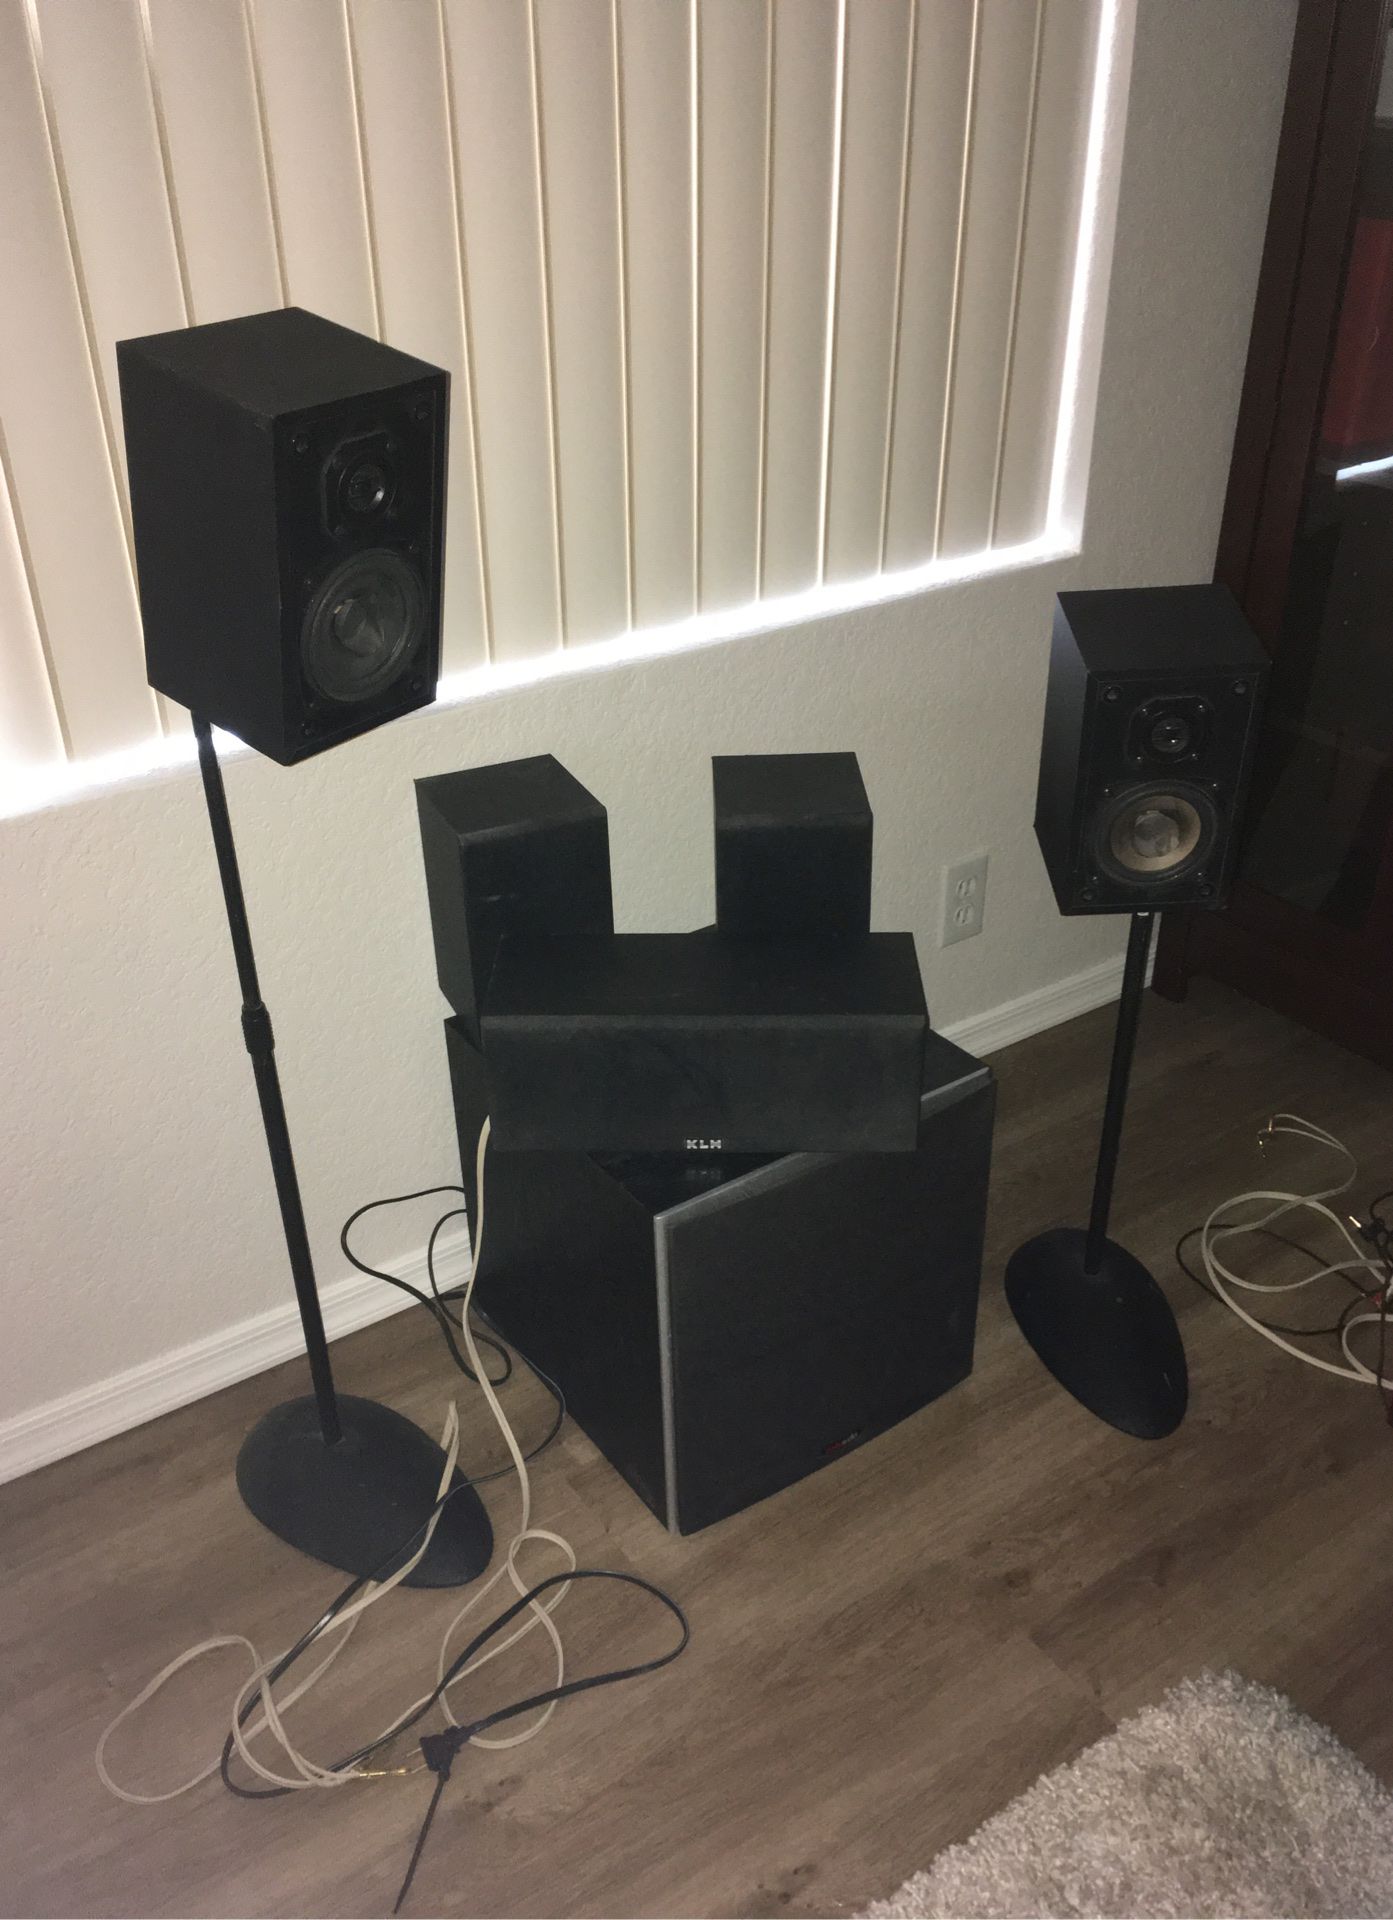 Dolby 5.1 Surround sound speakers, powered subwoofer , KLH and Polk Audio